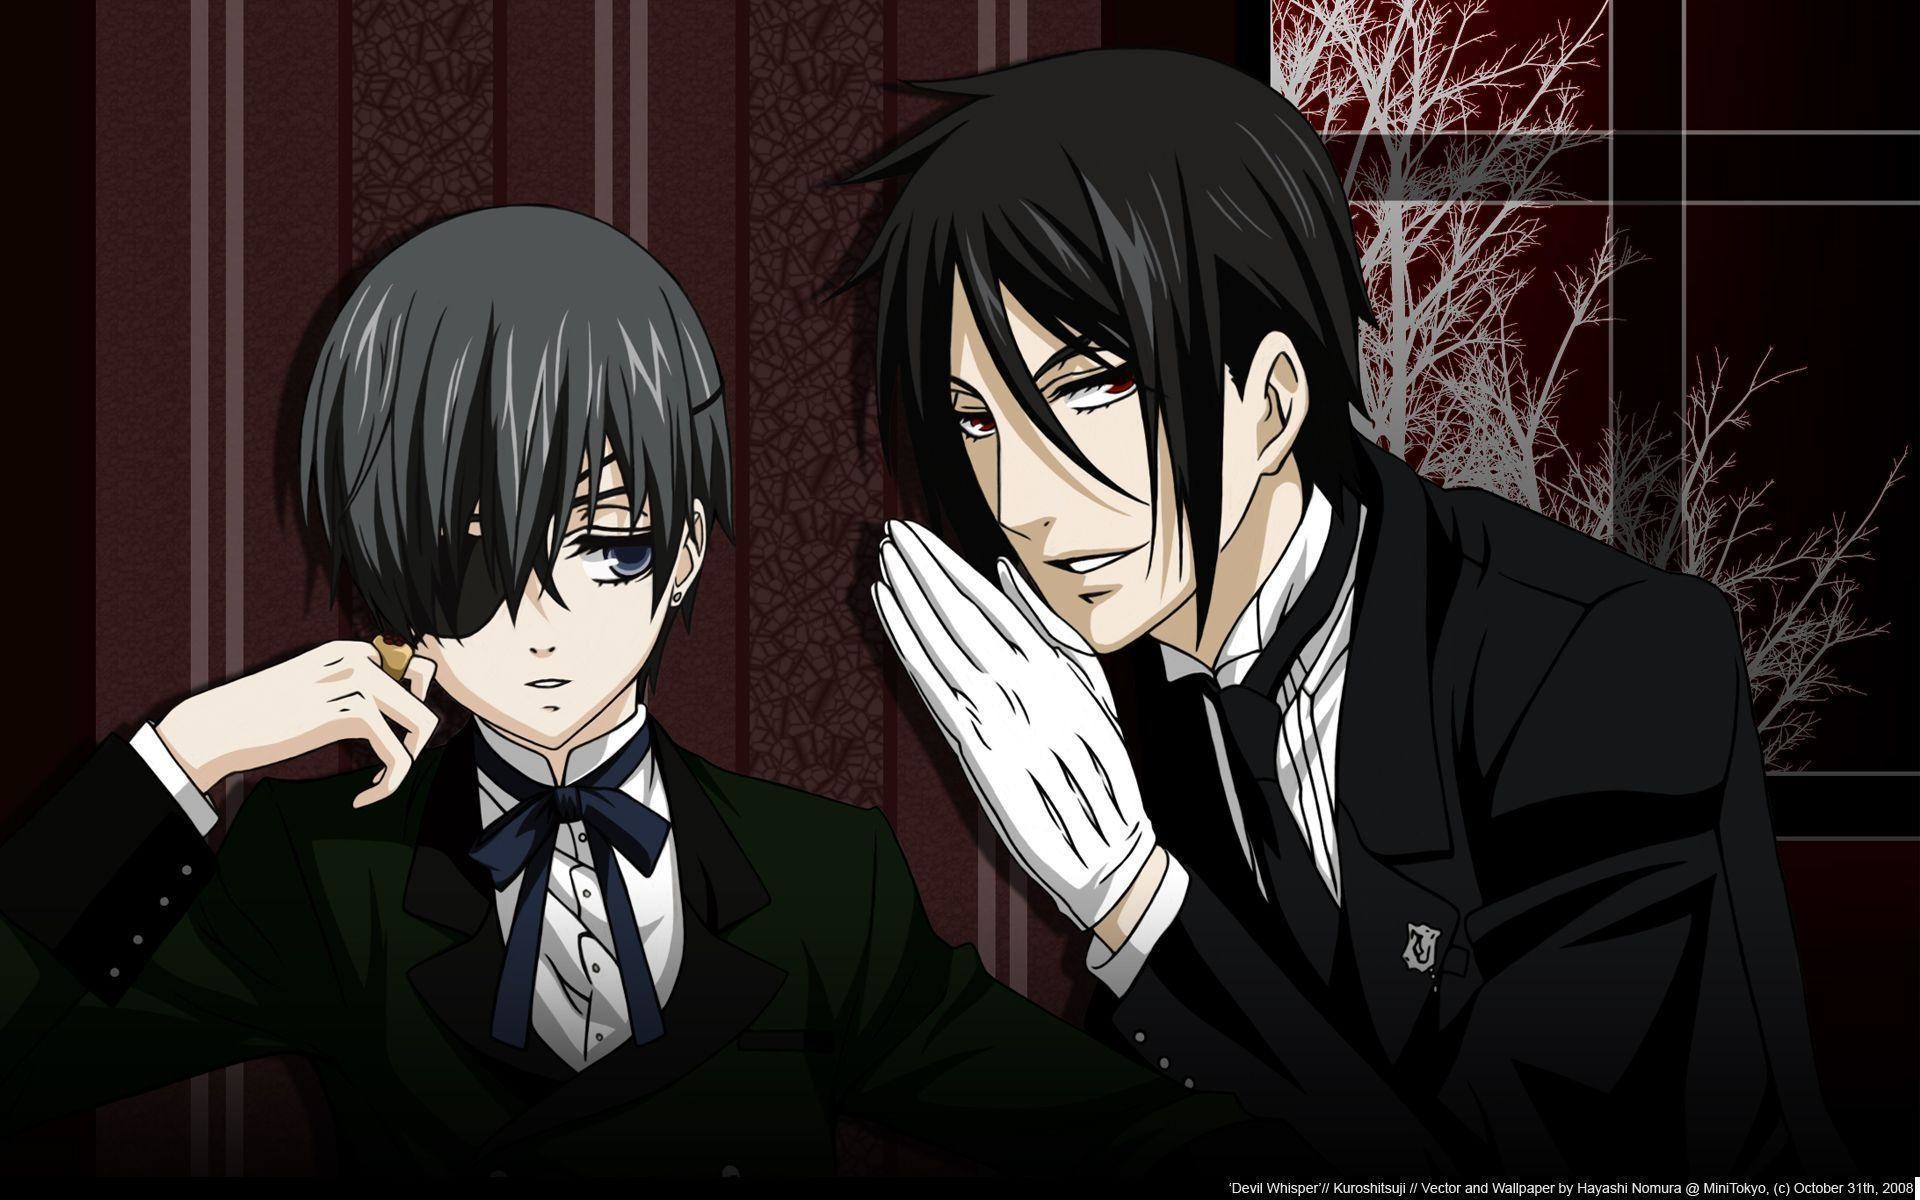 1920x1200 Most Downloaded Black Butler Wallpapers - Full HD wallpaper search